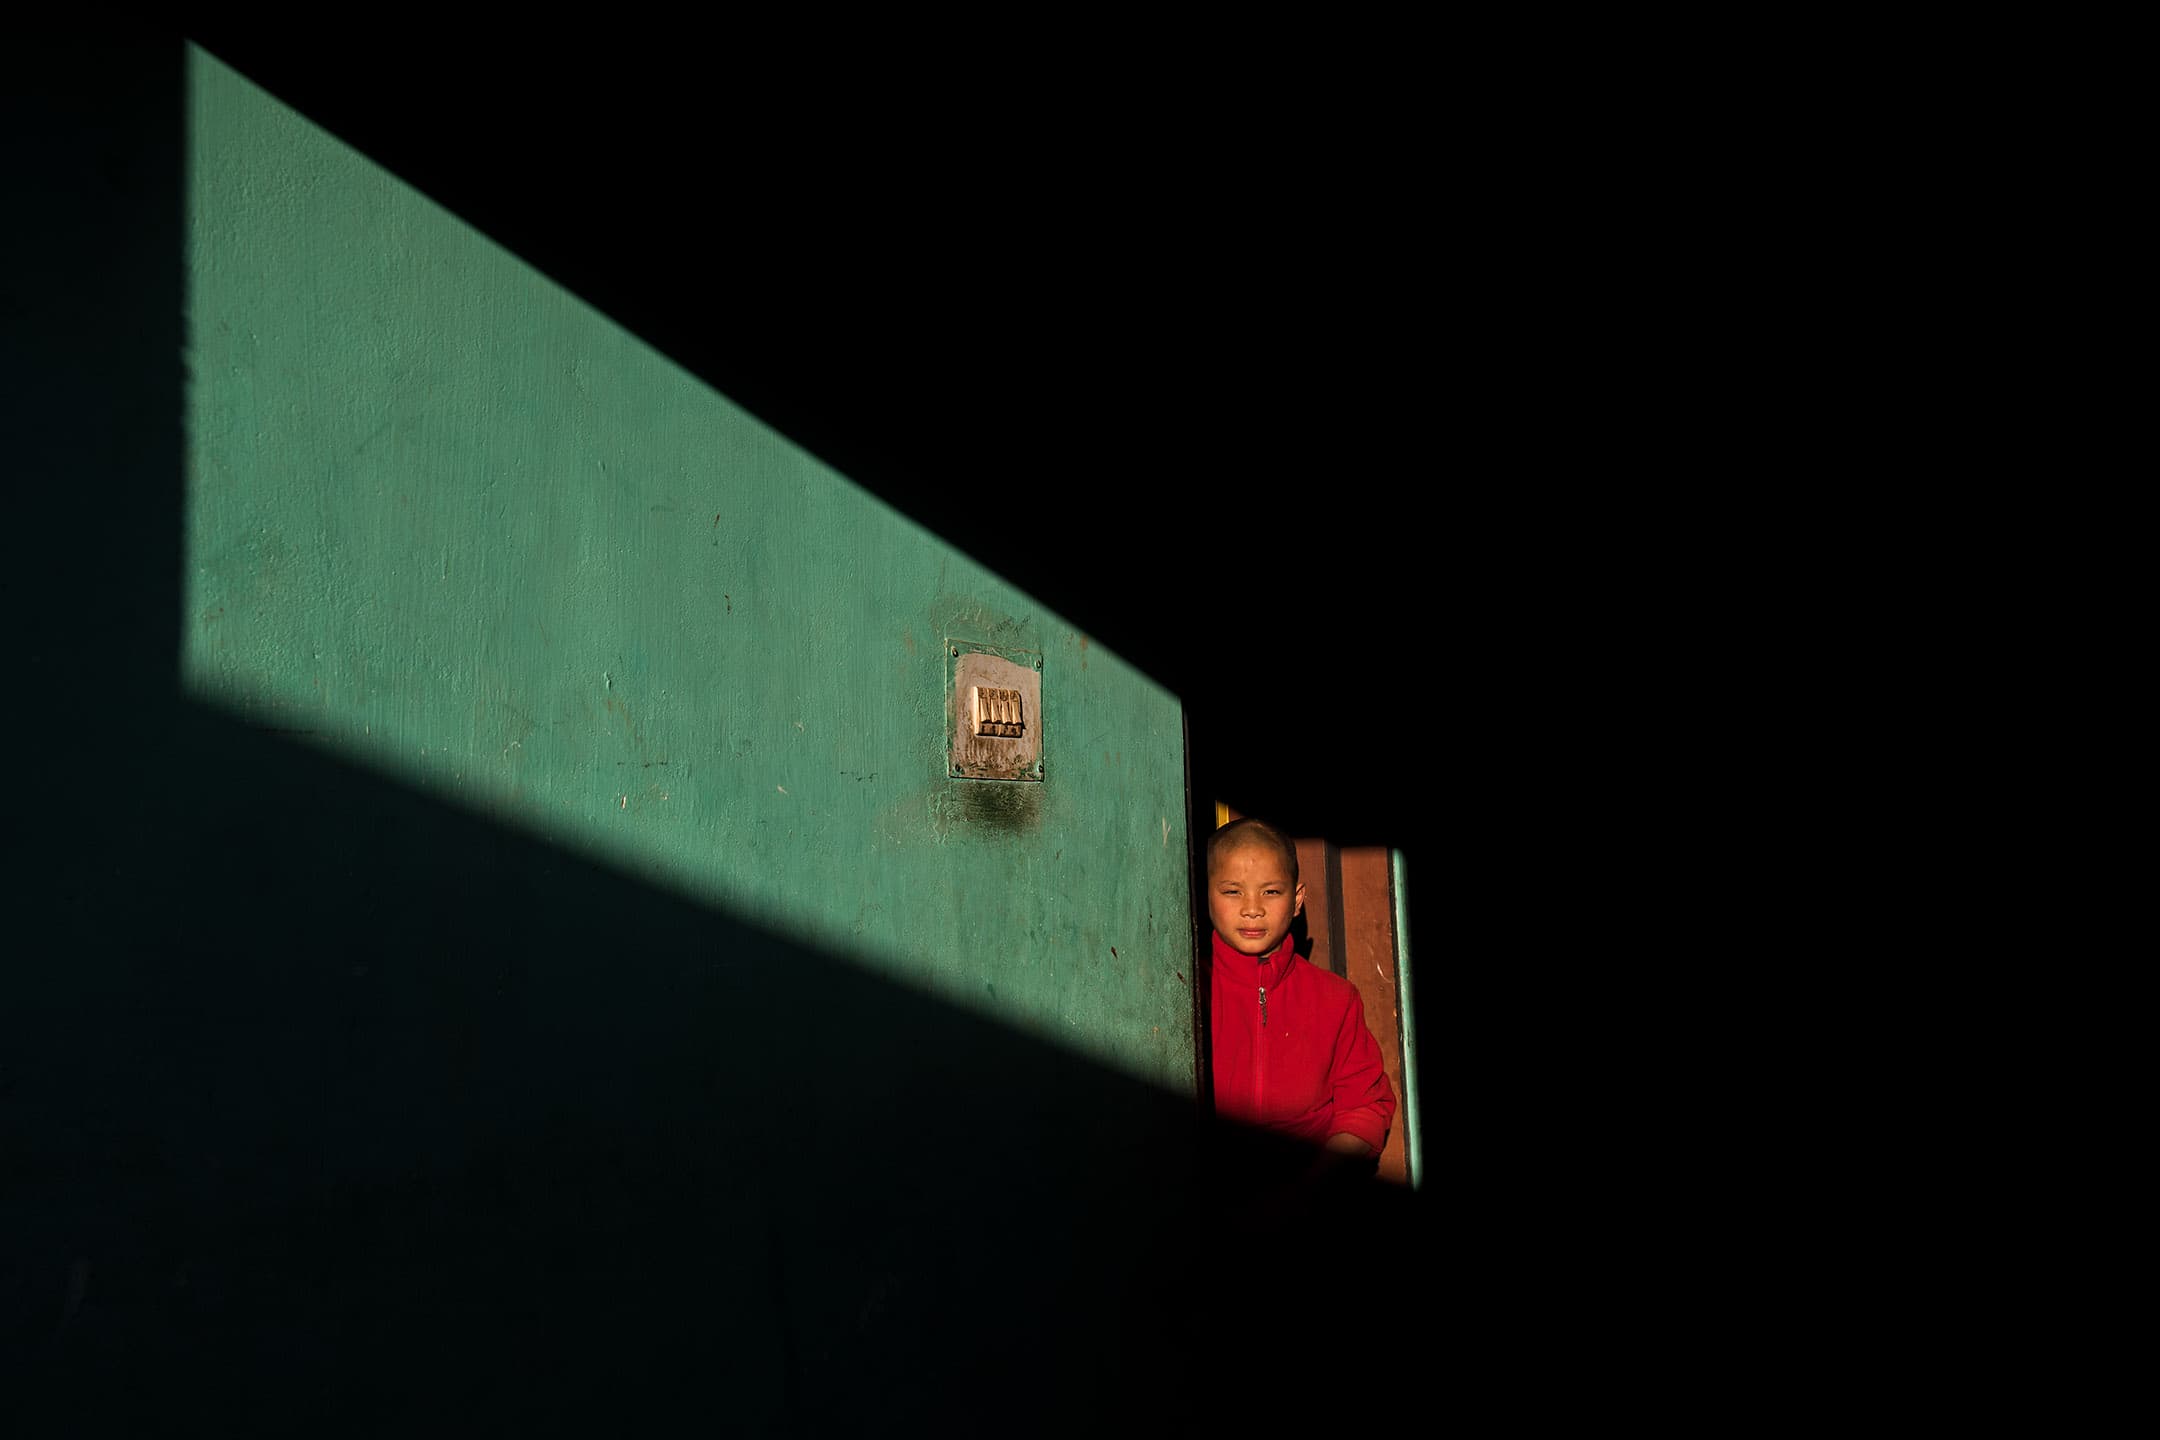 A young novice monk stands in a slice of golden hour light at Chimi Lhakhang, a Buddhist monastery perched on a hill just outside Punakha, Bhutan on December 6, 2017.  Bhutan’s natural light is soft and golden and while smiling monks in flowing maroon robes inhabit the ancient monasteries that dot the craggy countryside.  The young boy posed for this portrait at the request of the photographer.